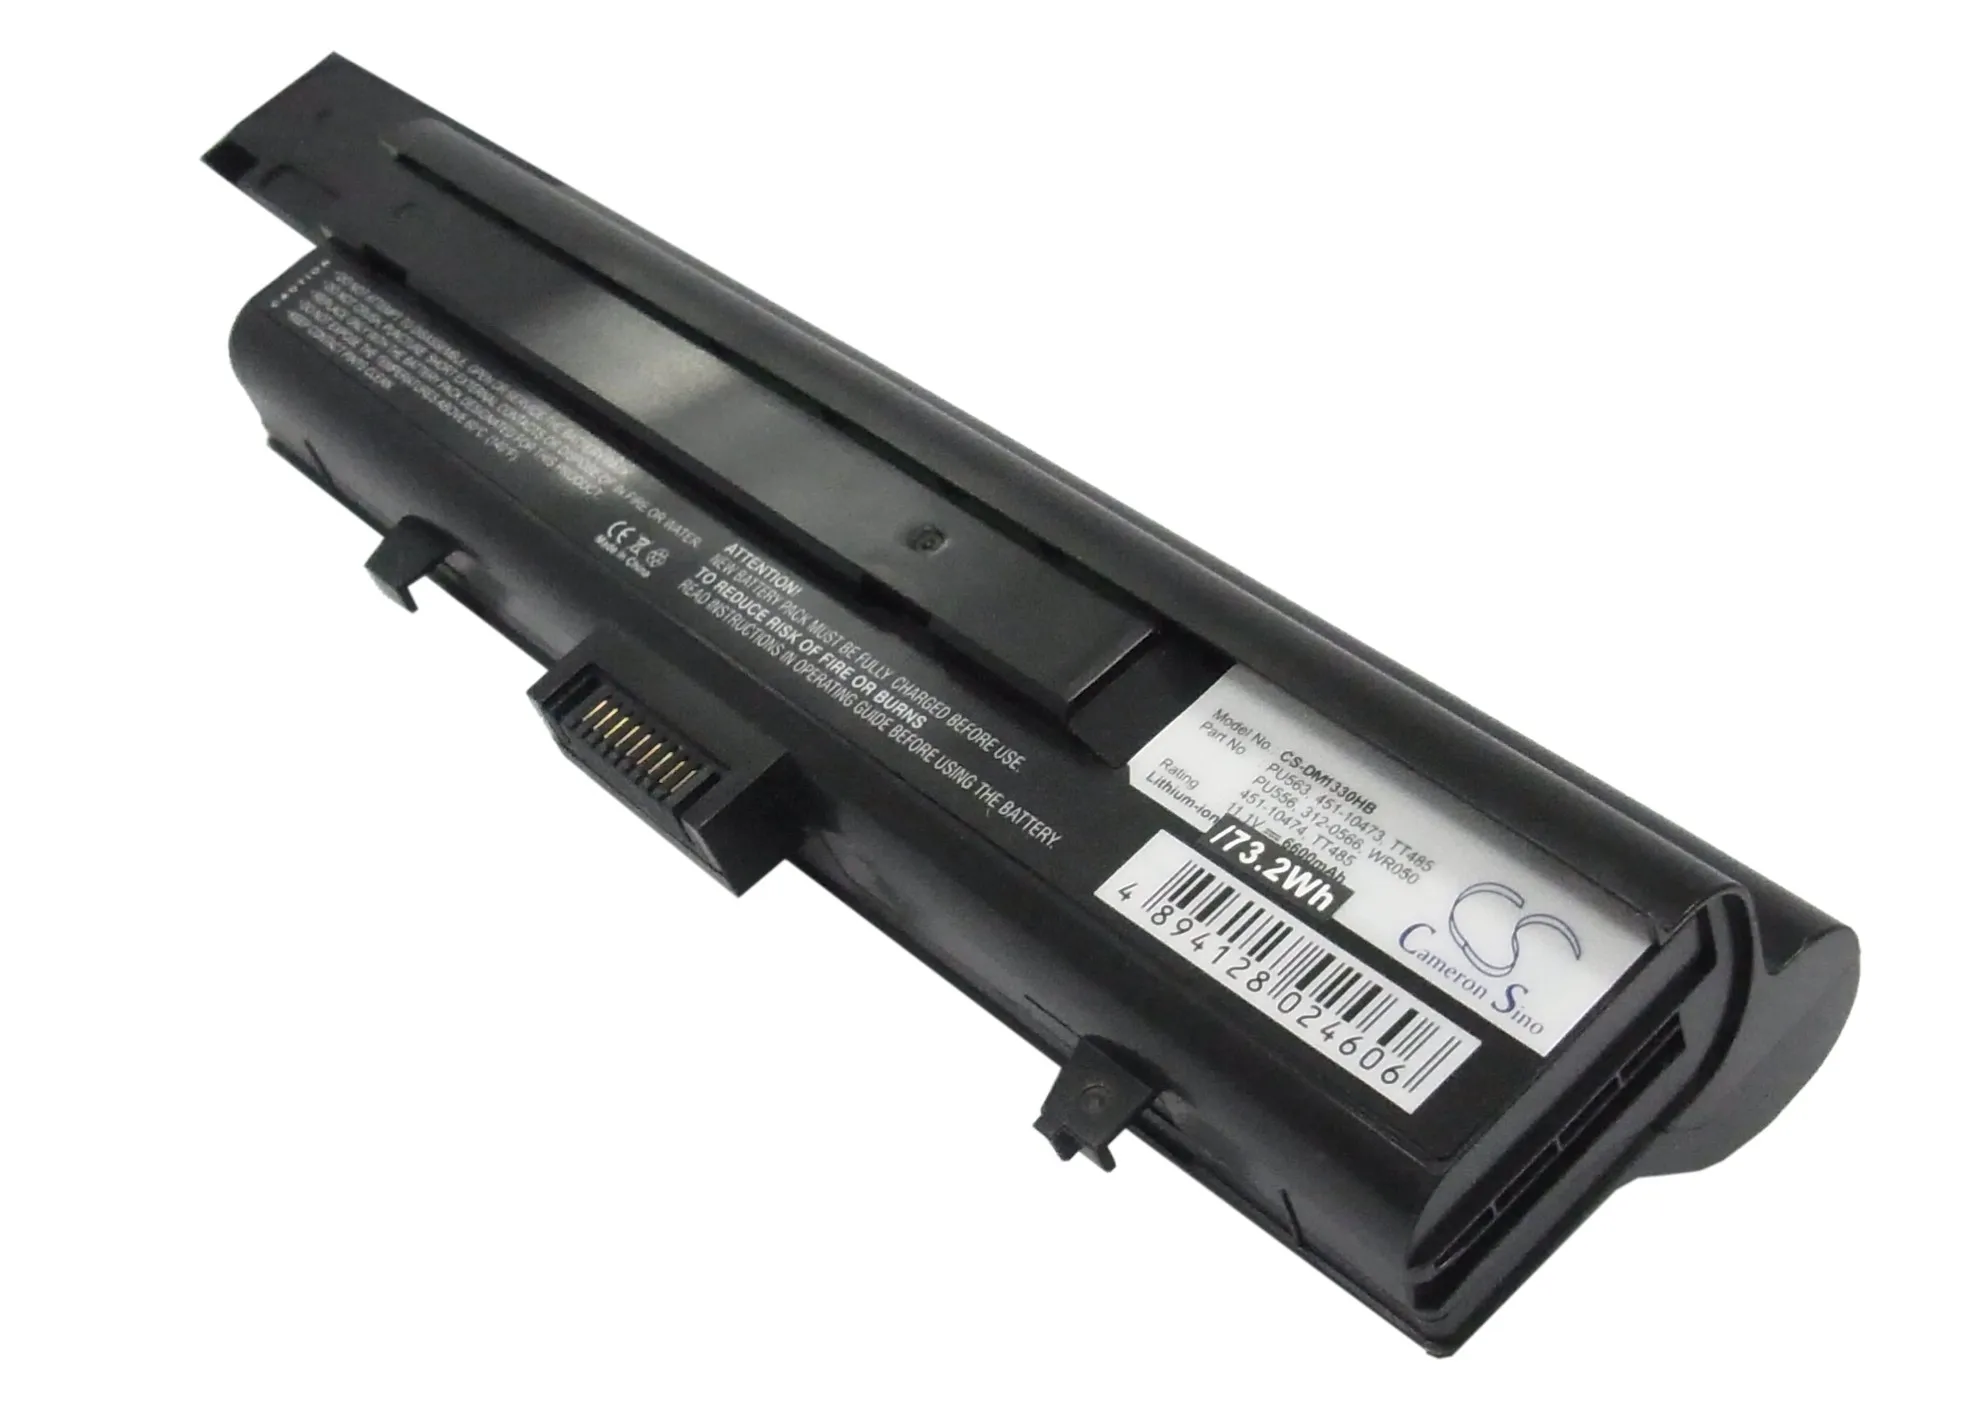 

CS 6600mAh battery for DELL Inspiron 1318,XPS M1330,XPS M1350 312-0566,312-0567,312-0739,451-10473,451-10474,PU556